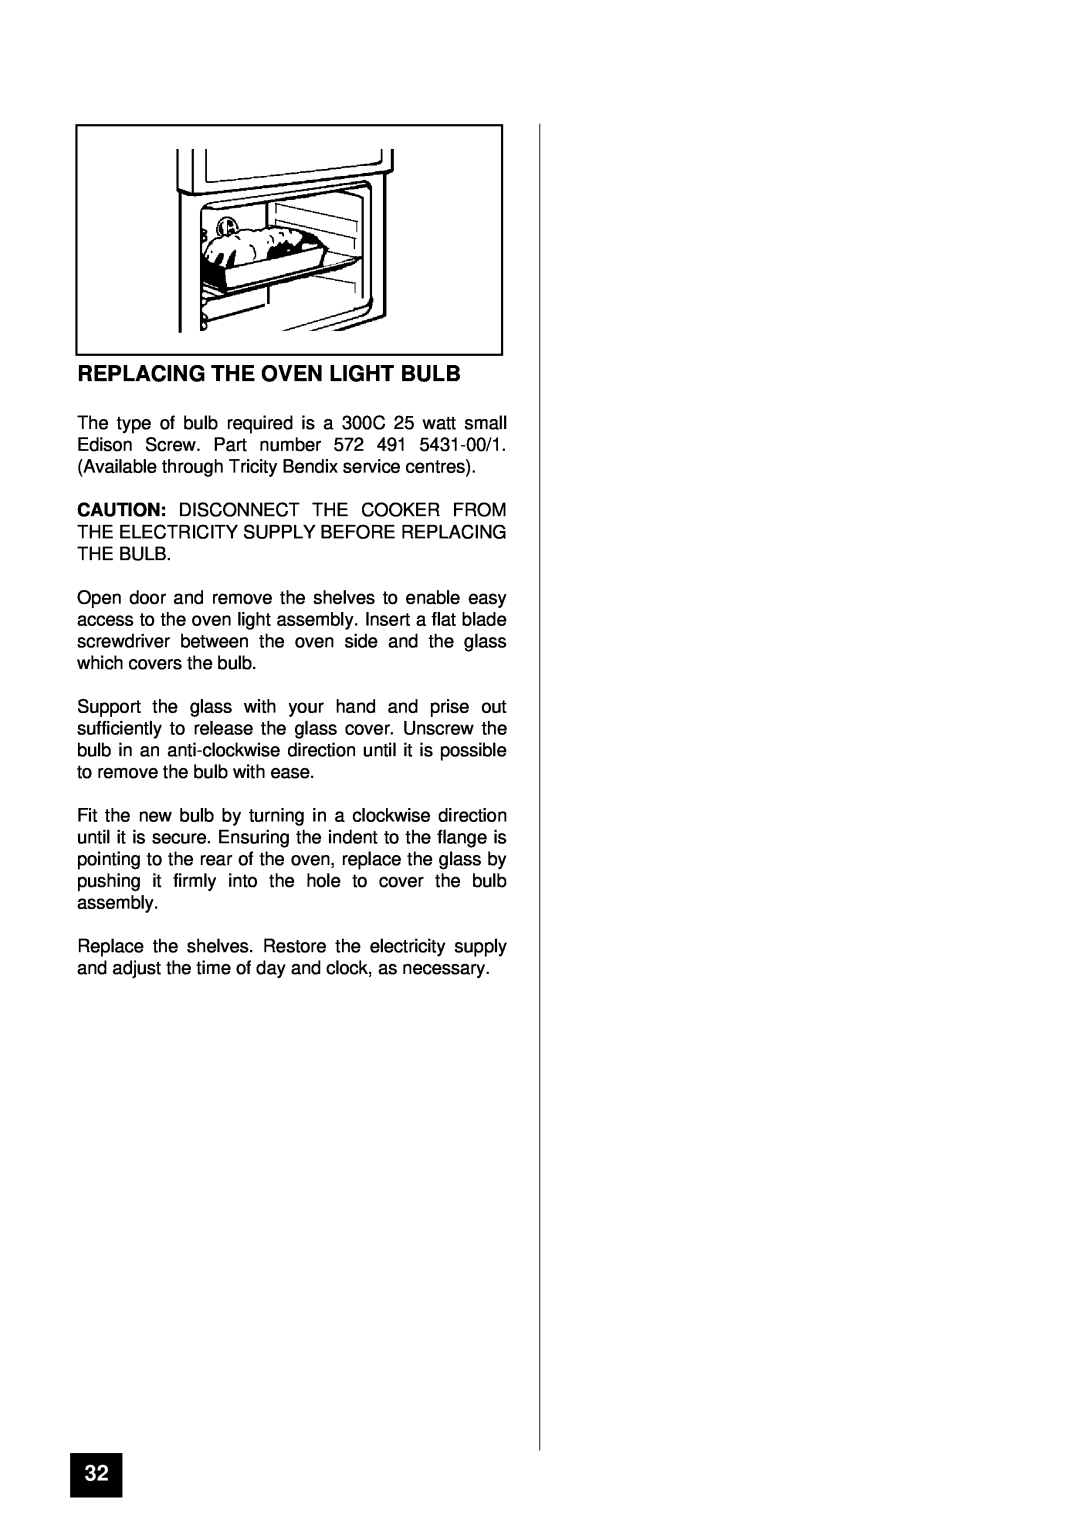 Tricity Bendix BD 911 installation instructions Replacing The Oven Light Bulb 